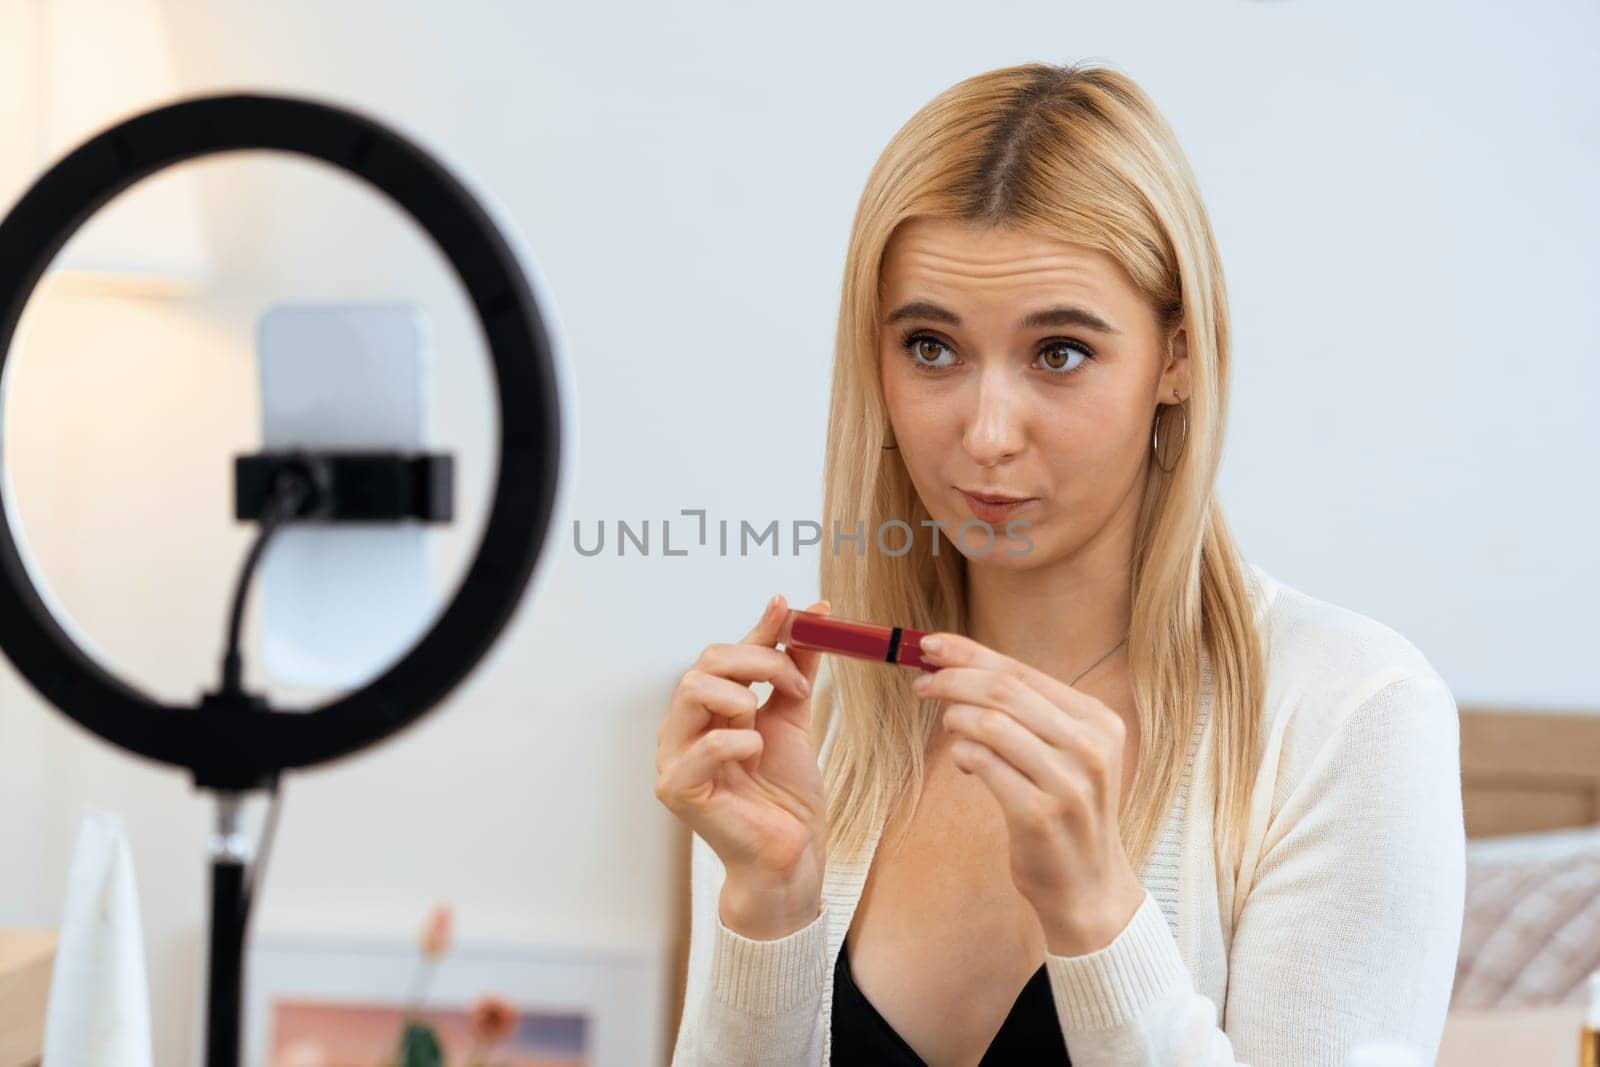 Young woman making beauty and cosmetic tutorial video content for social media. Beauty blogger using camera and light ring while showing how to apply liquid lipstick to audience or follower. Blithe